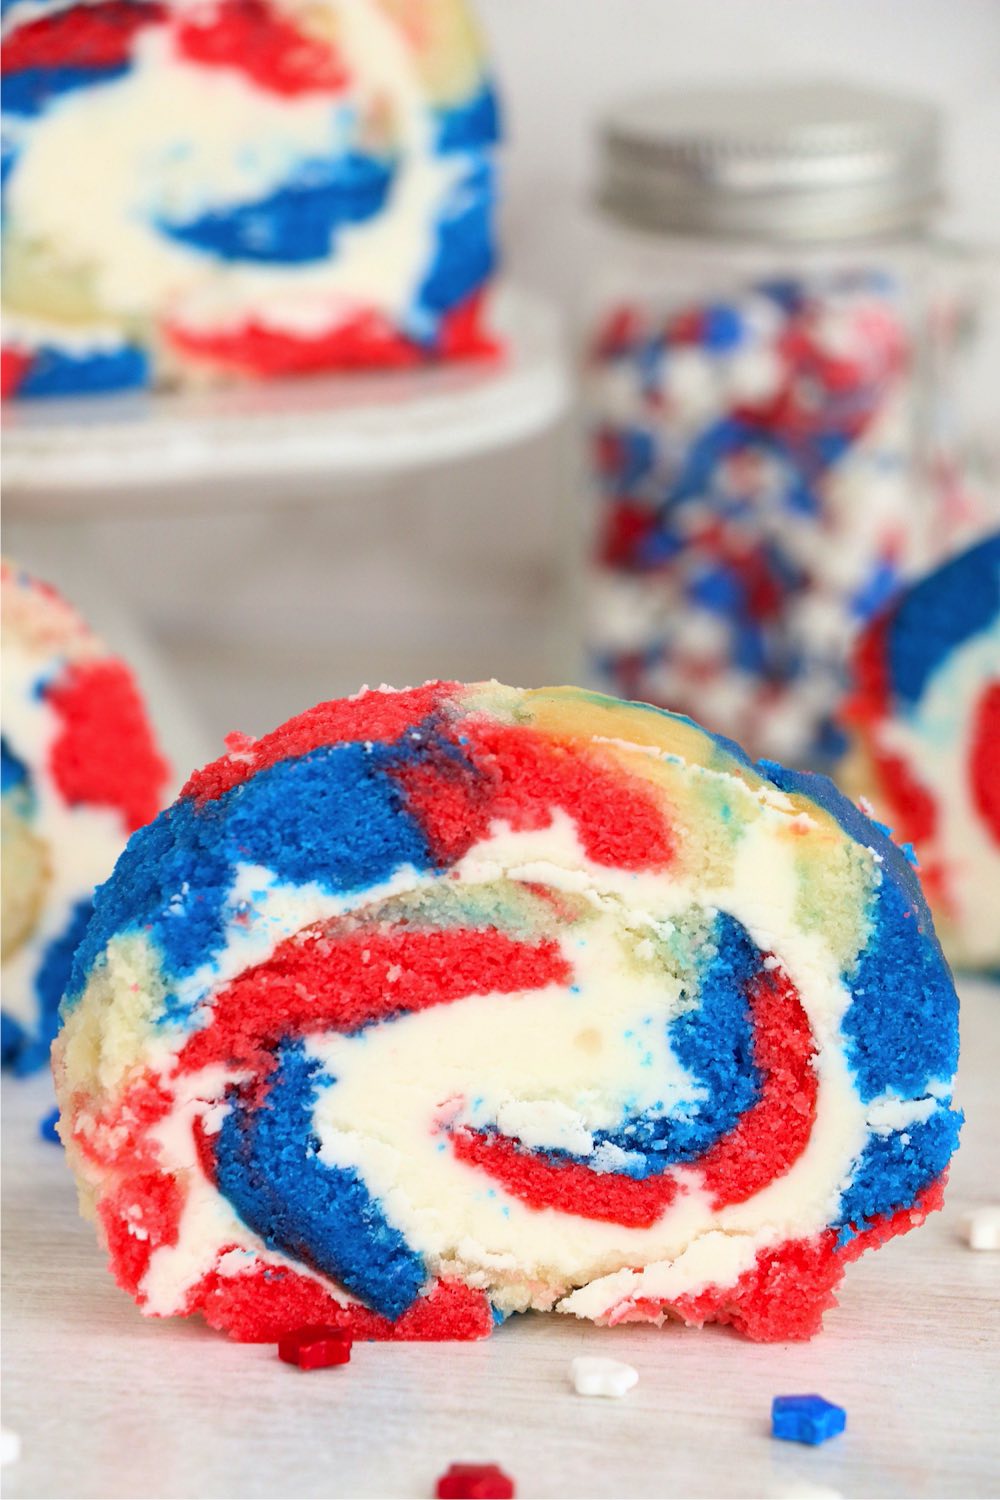 slice of red white and blue cake roll with frosting